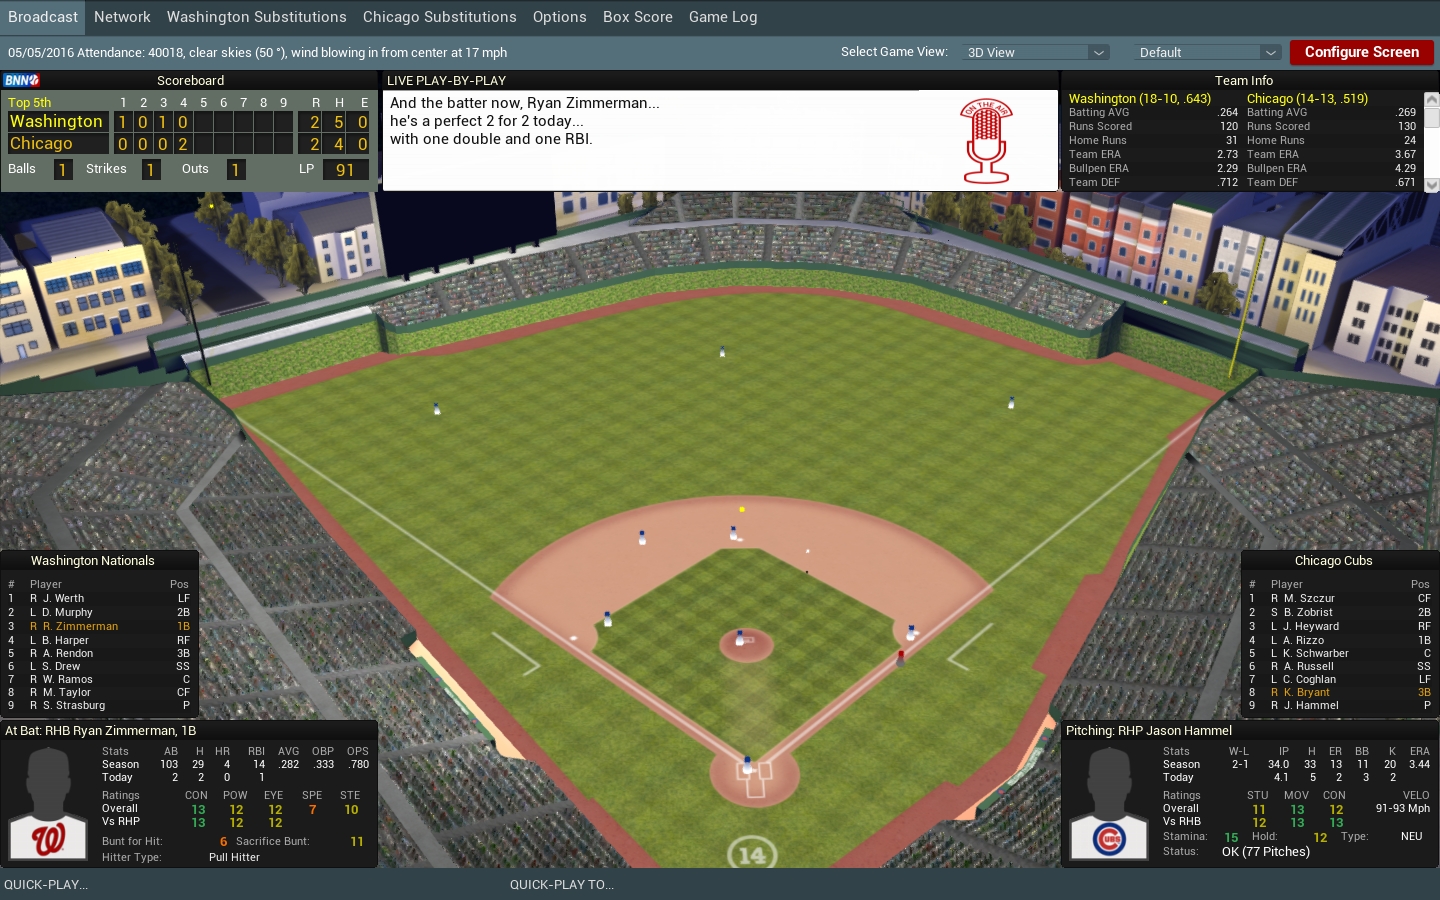 ootp mlb expansion team concepts